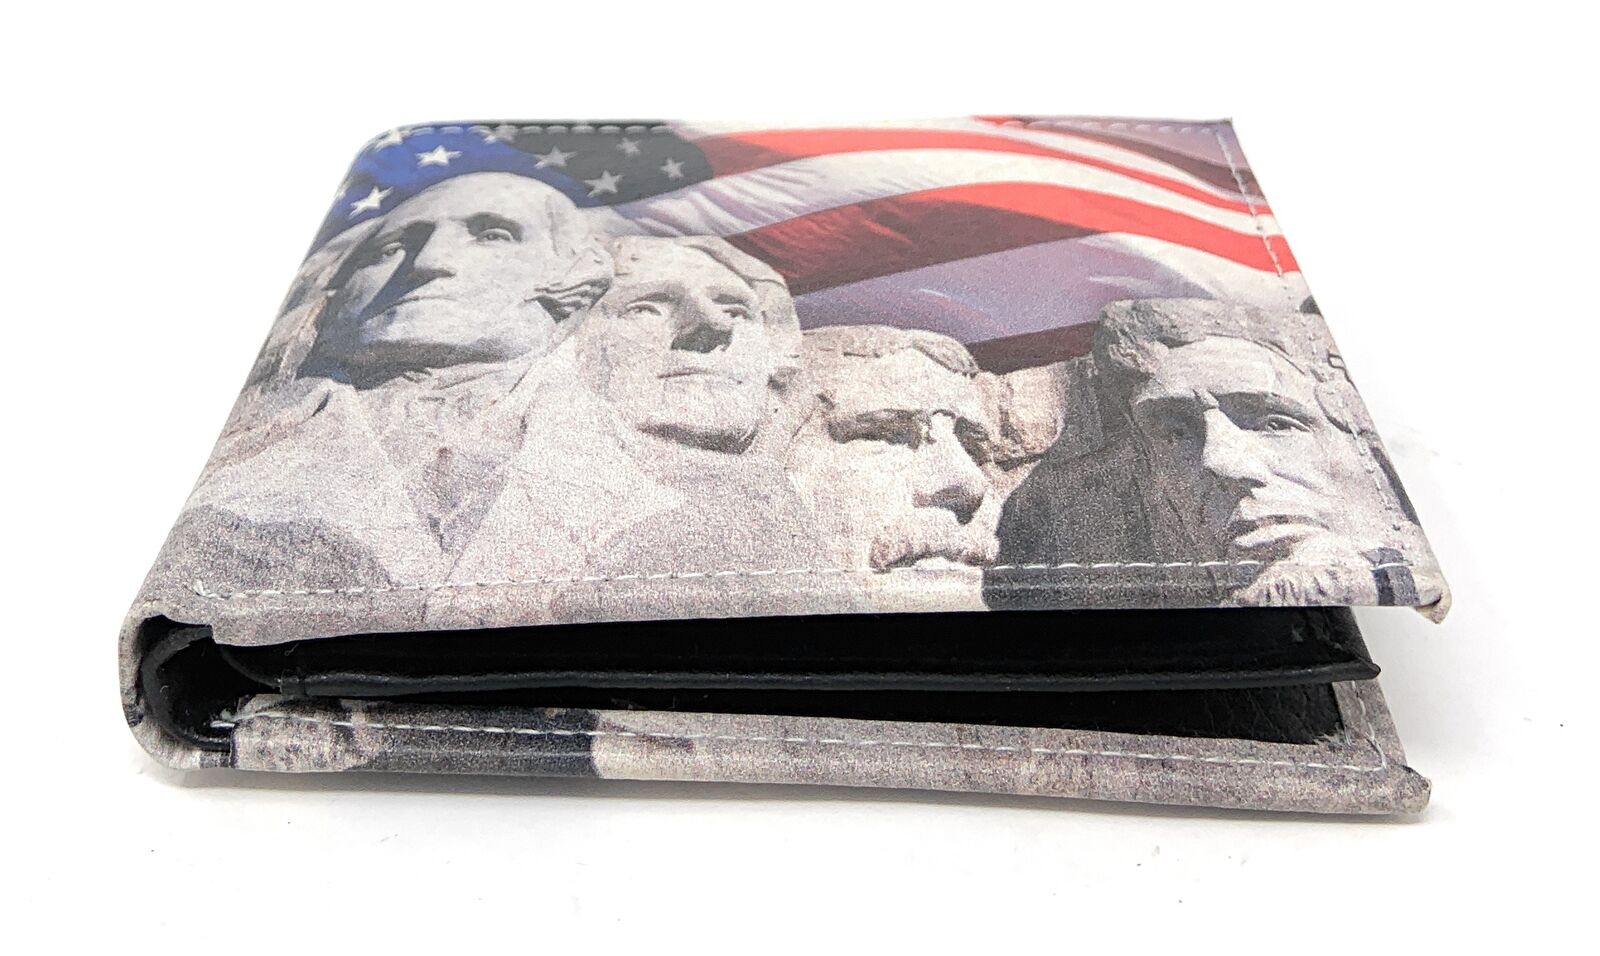 USA Patriotic Bifold Wallets In Gift Box Mens Womens Youth-UNCATEGORIZED-Empire Cove-LL-US_100_DOLLAR_OLD-Casaba Shop